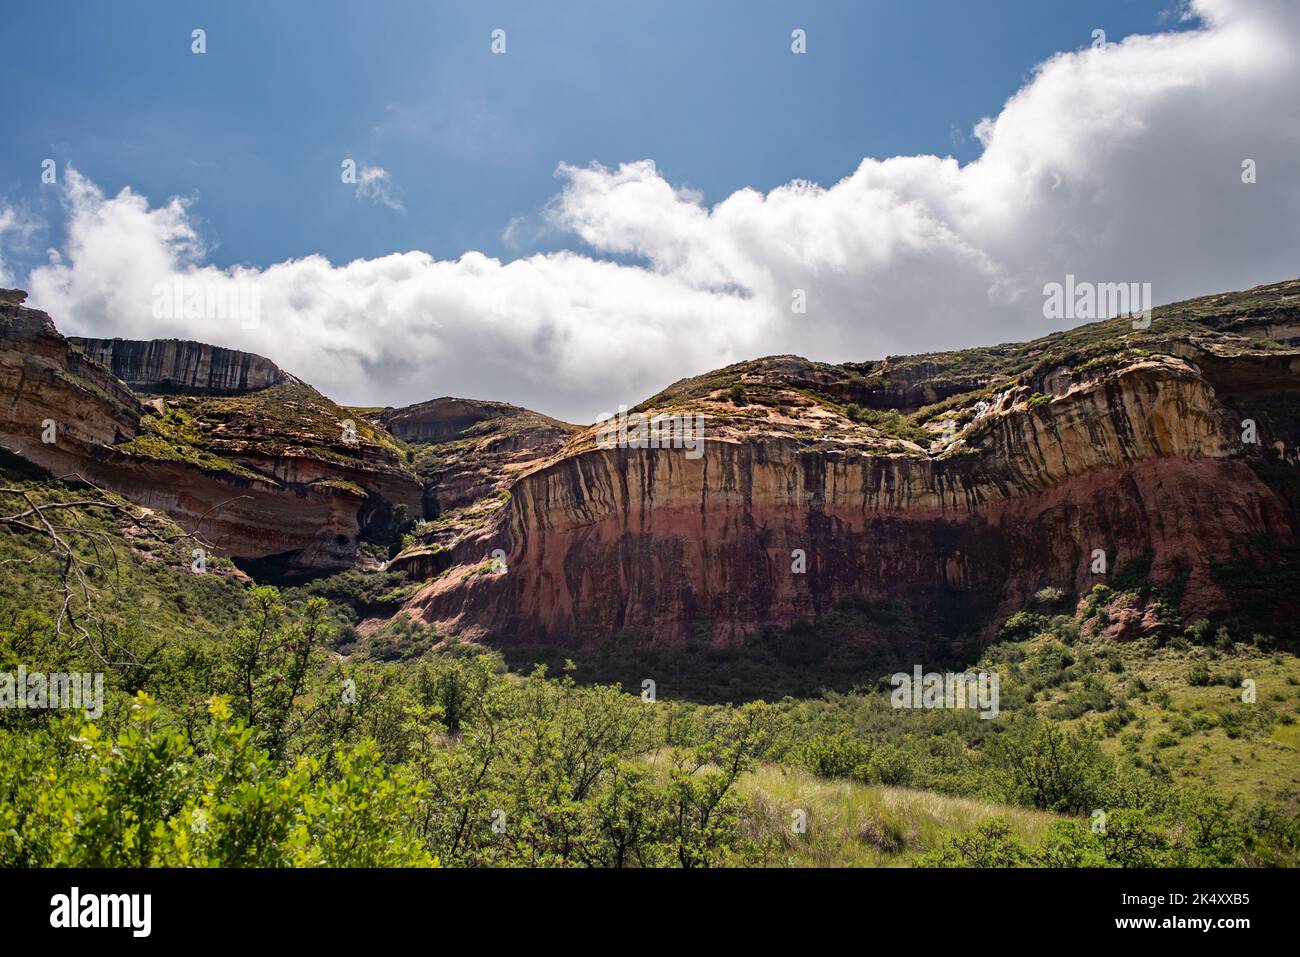 A view of Mushroom Rock; a colourful eroded rock formation in the Golden Gate Highlands National Park in South Africa. Stock Photo